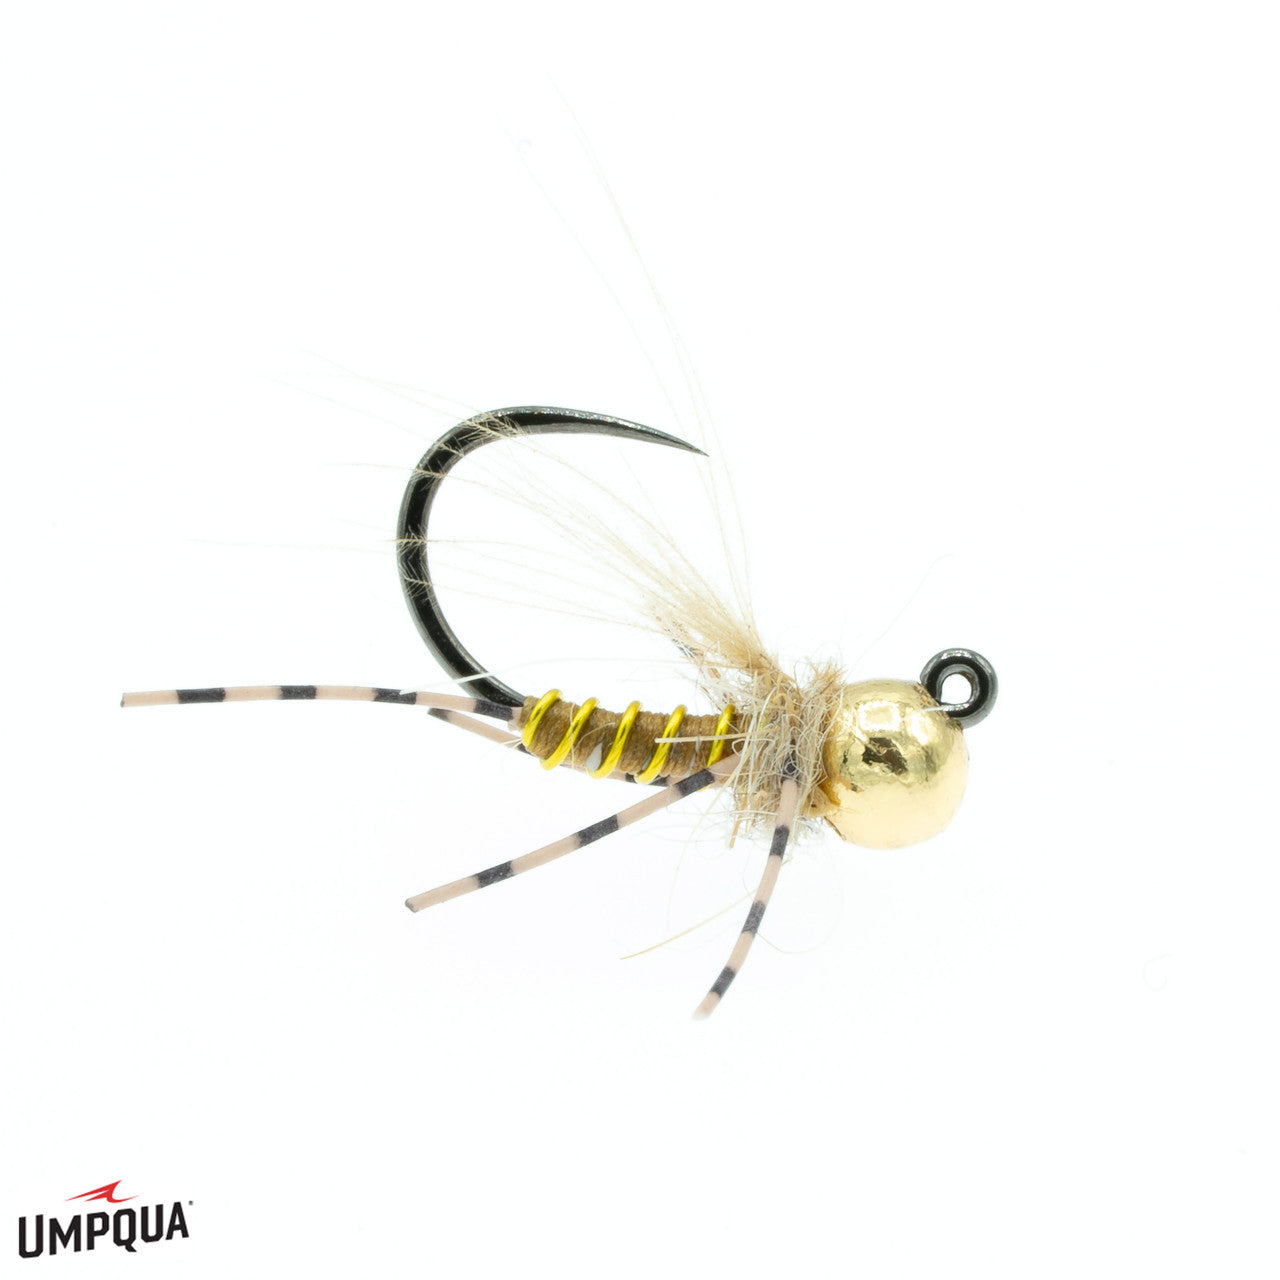 A Yellow Sally nymph fly tied on a jig hook